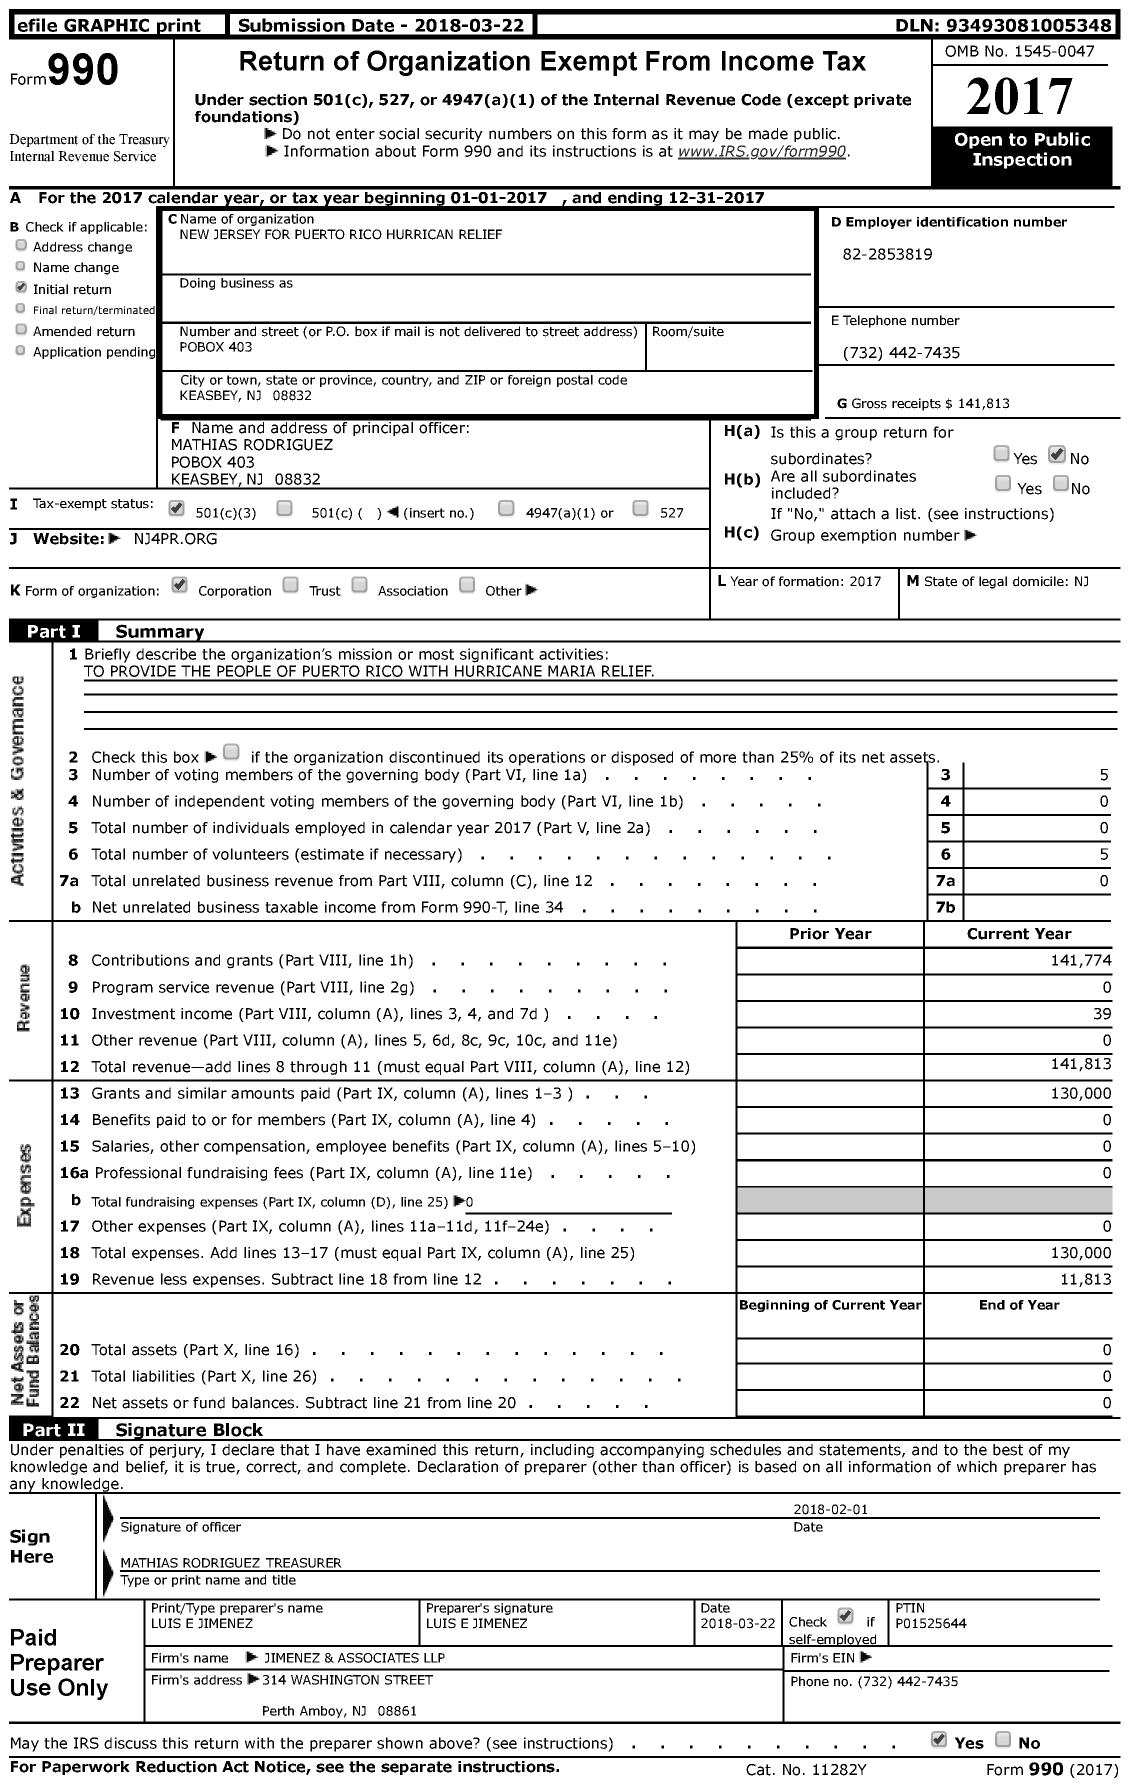 Image of first page of 2017 Form 990 for New Jersey for Puerto Rico Relief